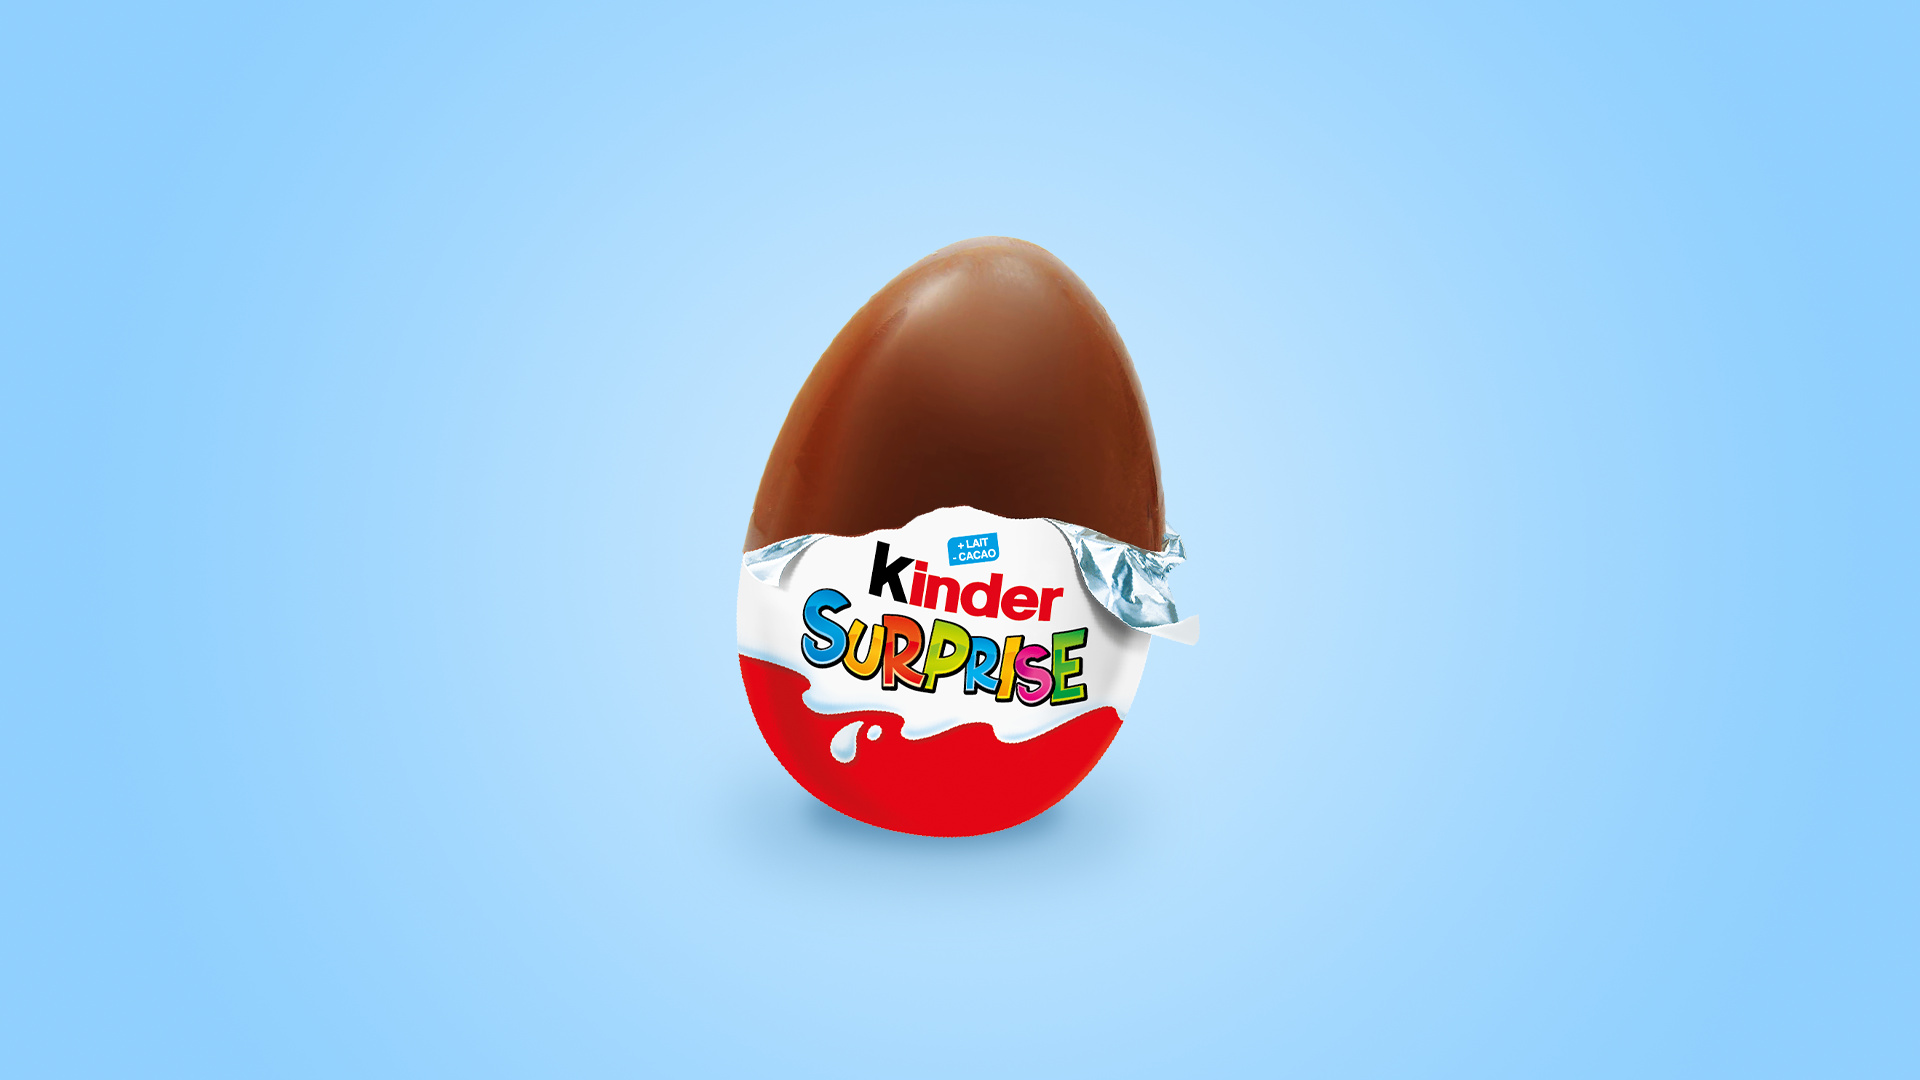 Kinder (Brand): A hollow milk chocolate egg, Based on the Italian tradition of large chocolate eggs. 1920x1080 Full HD Wallpaper.